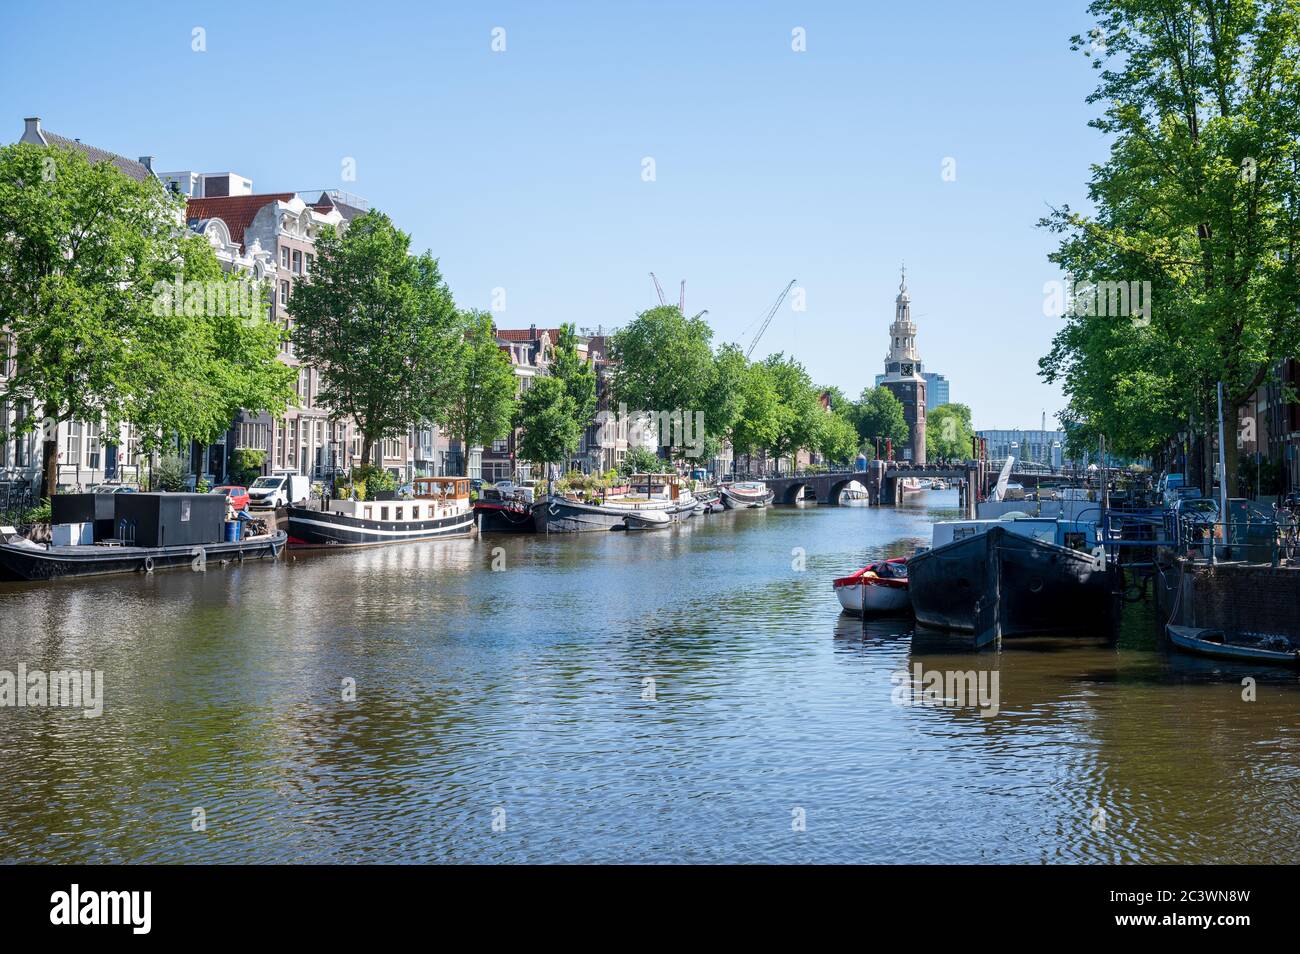 Oudeschans in the centre of Amsterdam, Netherlands  Canals are quiet during coronavirus lockdown Stock Photo